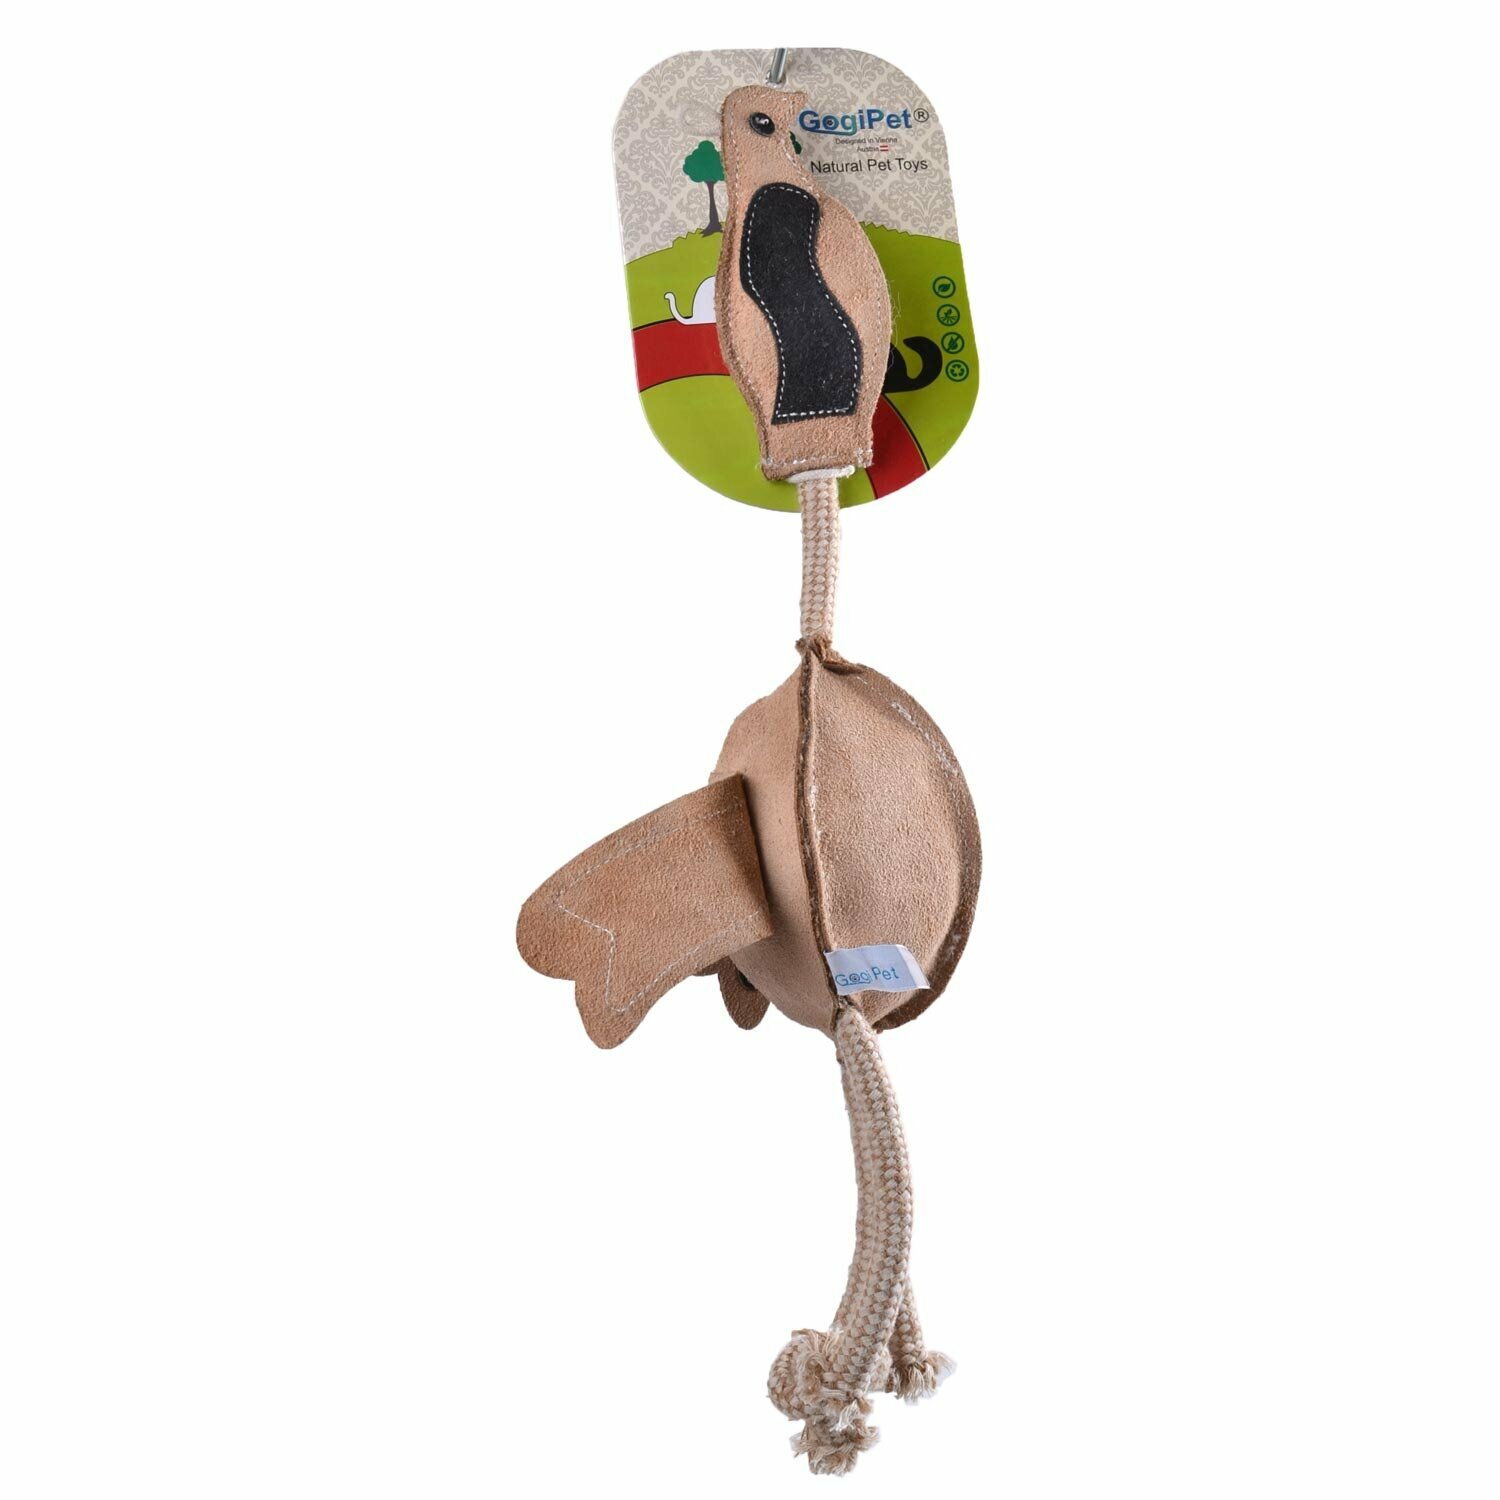 GogiPet dog toys made from sustainable raw materials